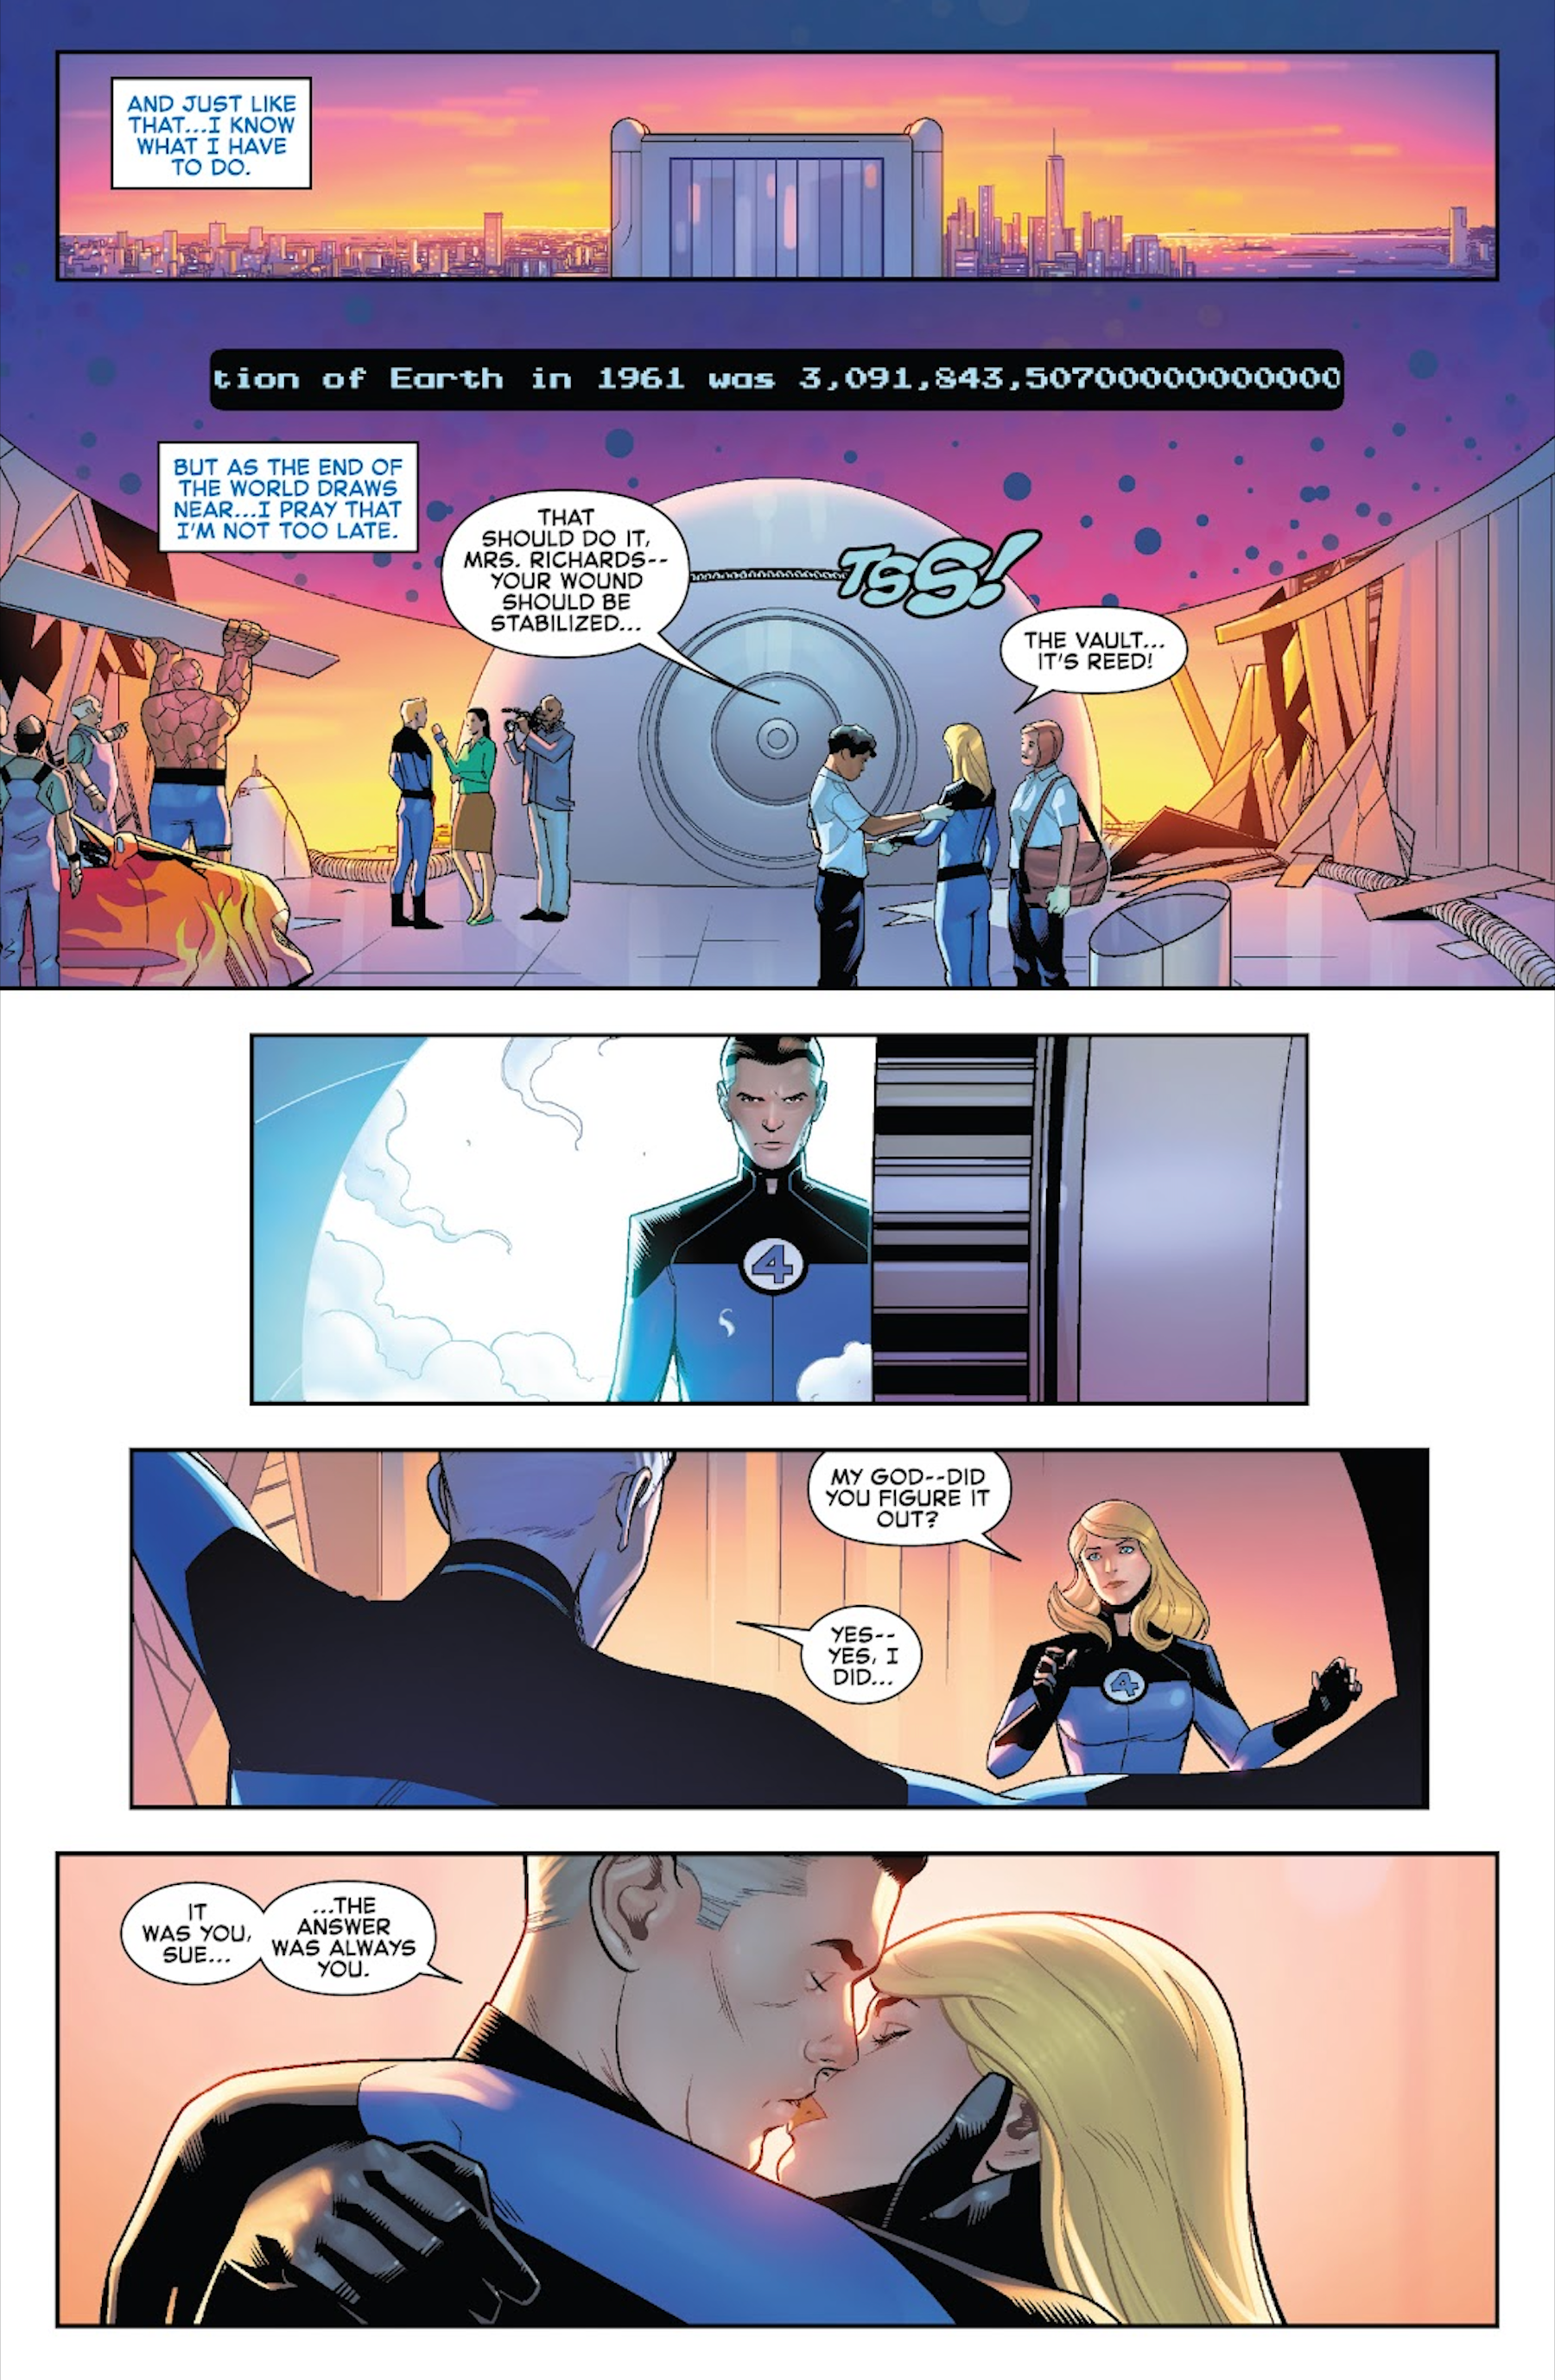 Reed Richards leaves the vault